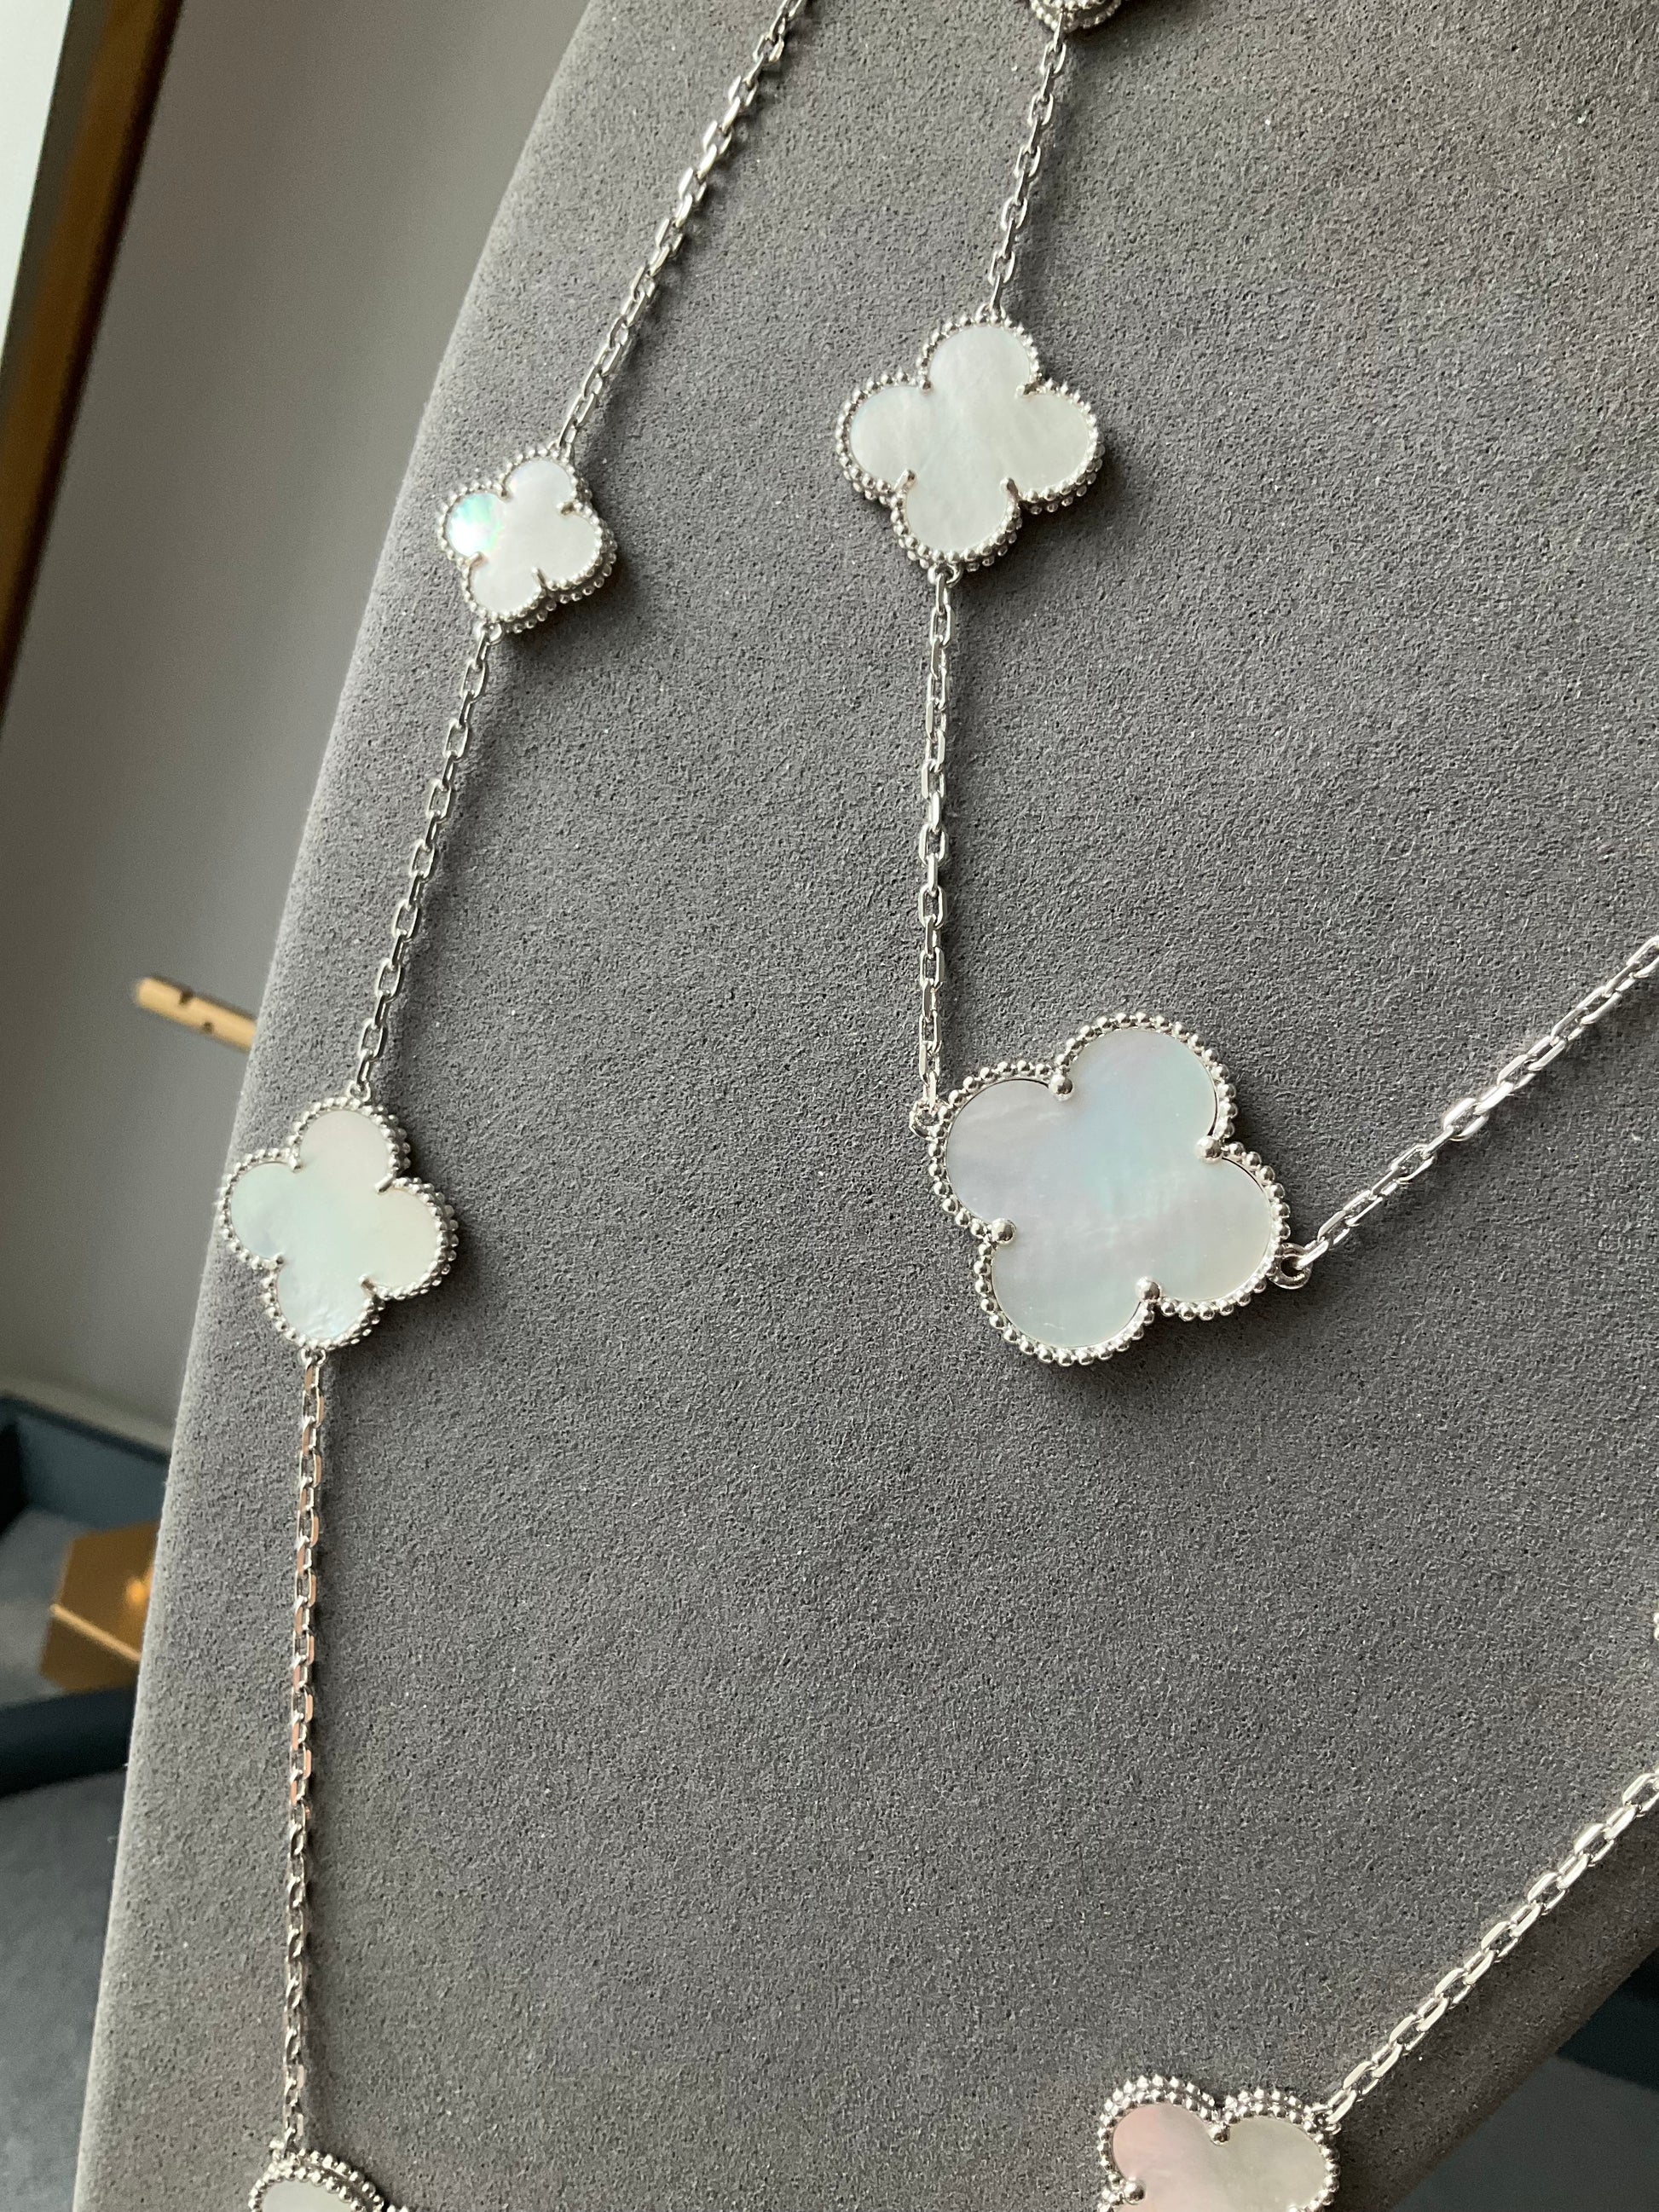 16 motifs mother of pearl charm clover necklace 925 silver with 18k white gold plated 120cm long - ParadiseKissCo